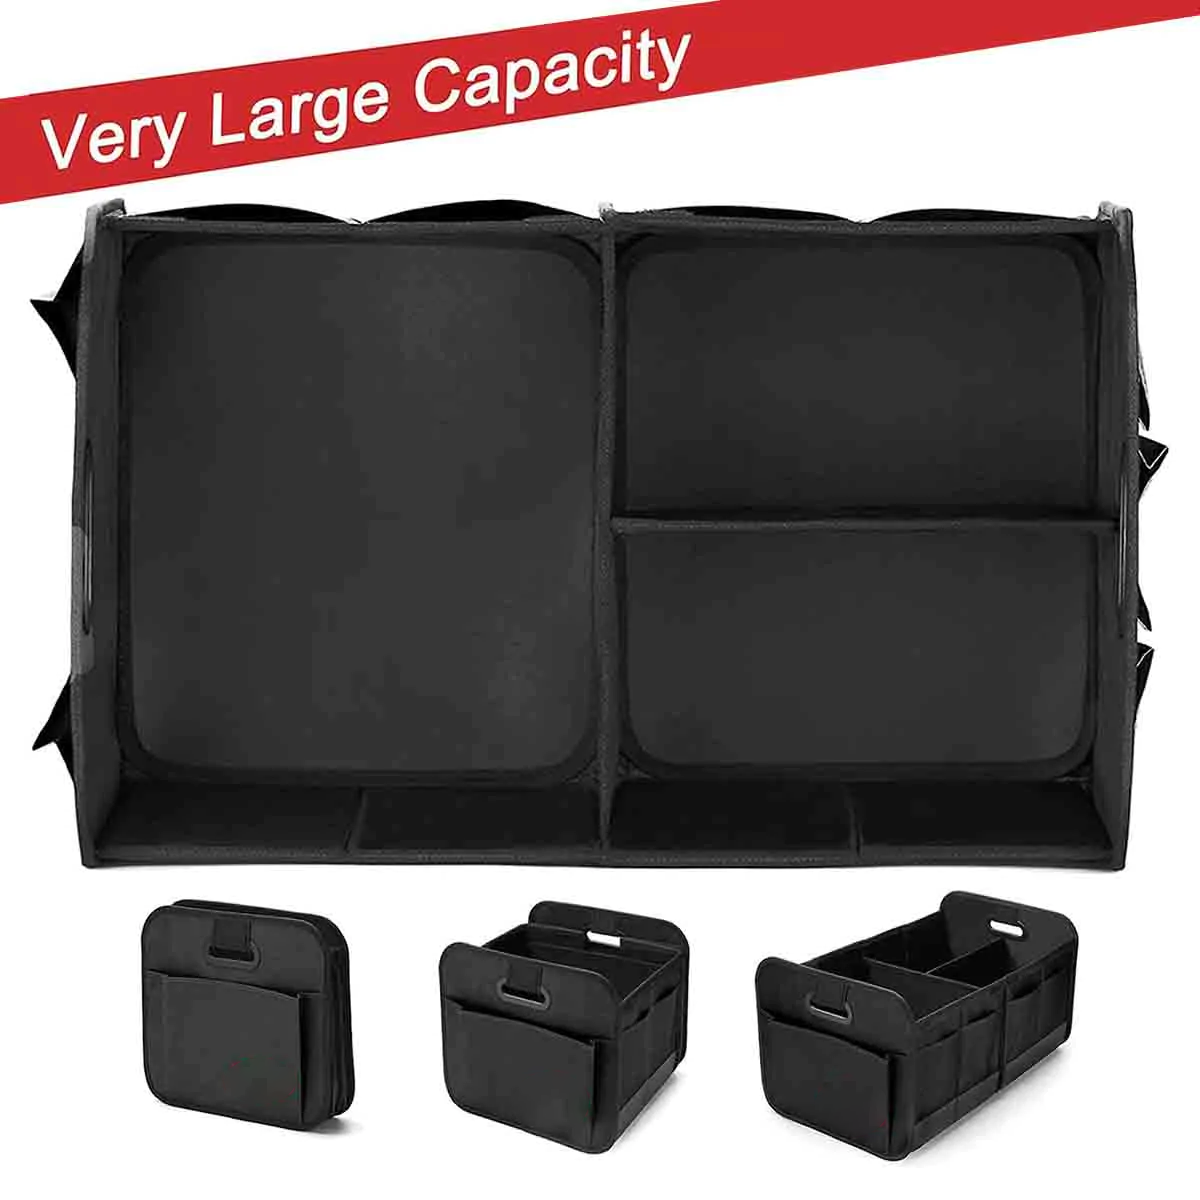 Custom Text For Car Trunk Organizer Storage, Compatible with All Cars, Reinforced Handles, Collapsible Multi, Compartment Car Organizers, Foldable and Waterproof, 600D Oxford Polyester KO12995